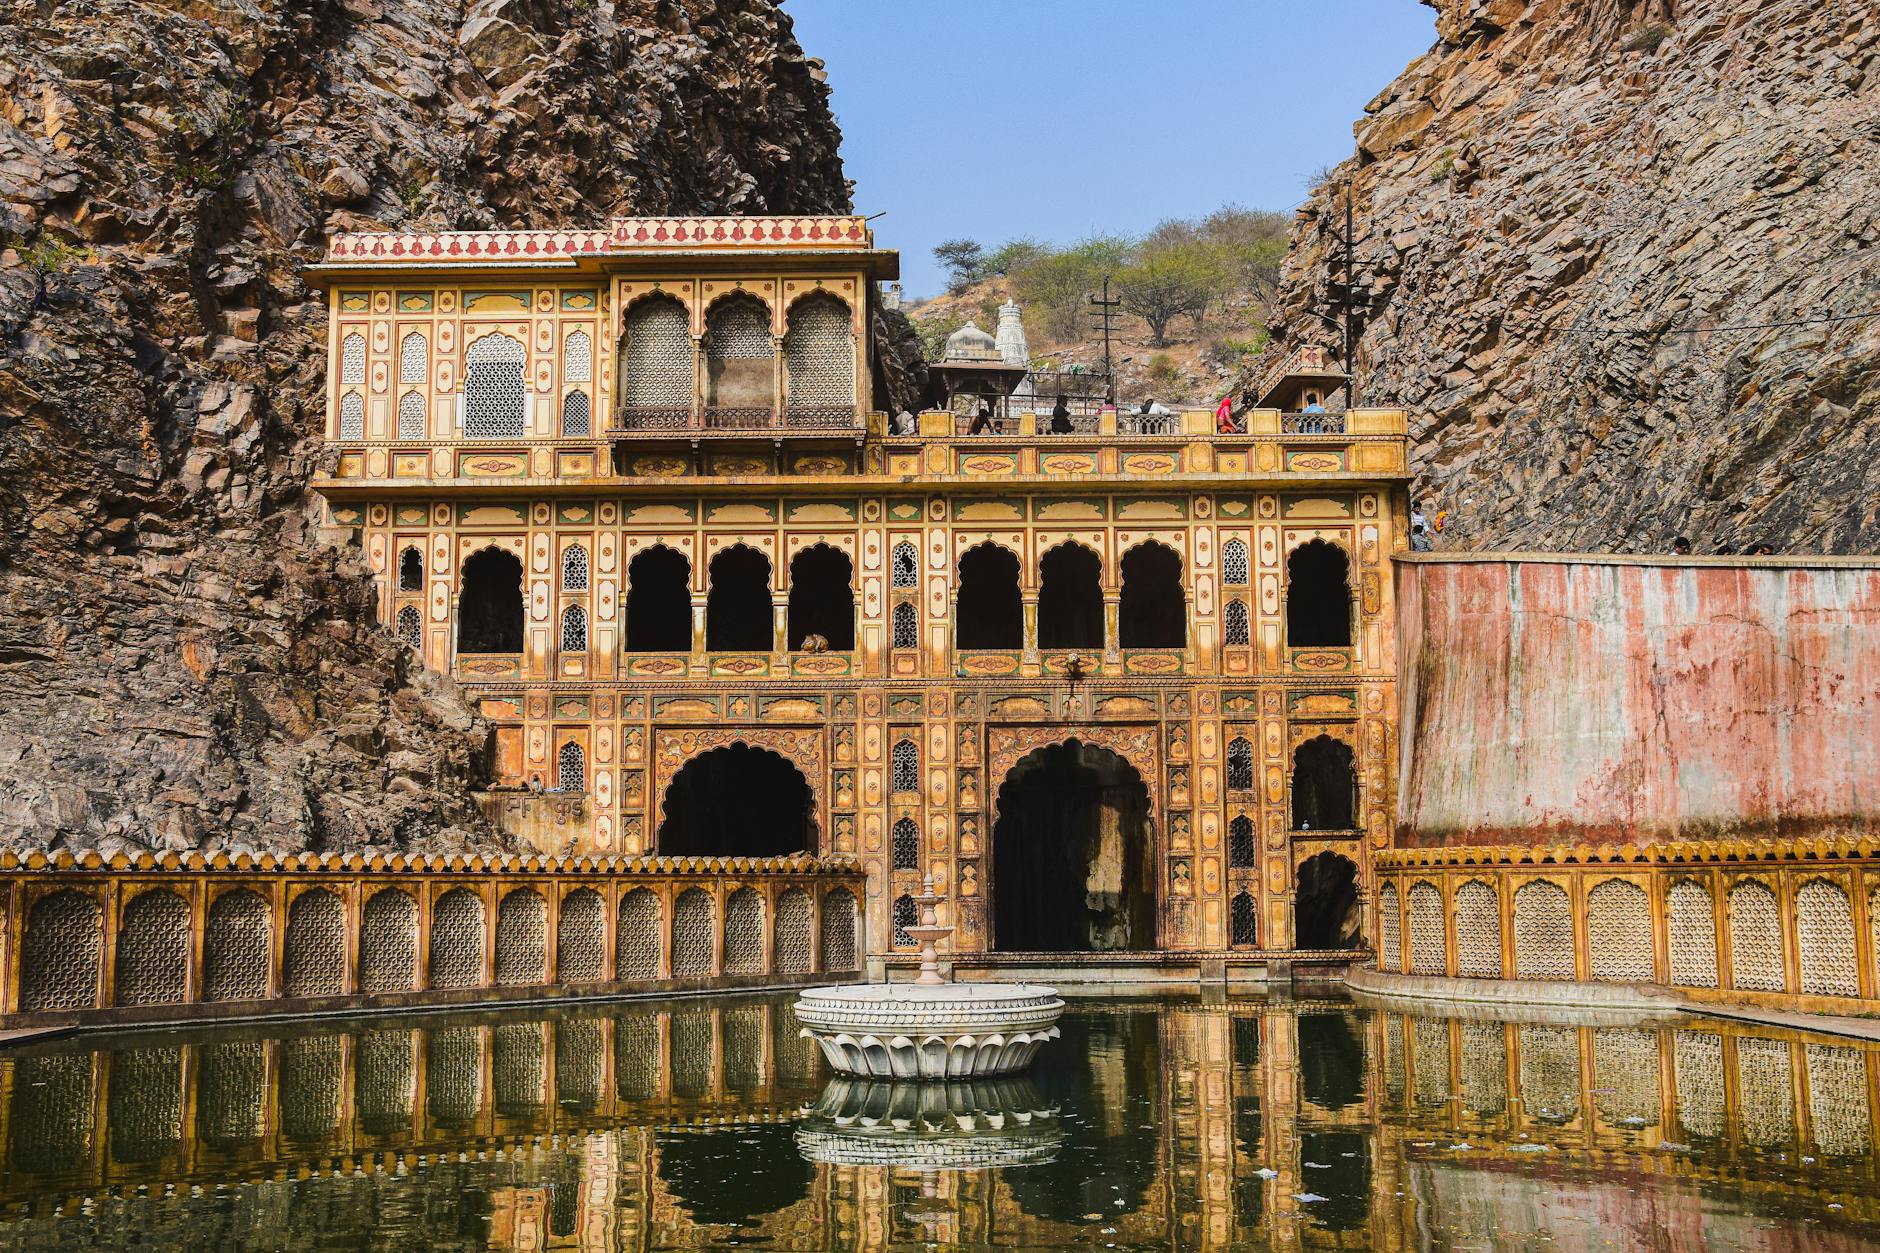 view of the monkey temple in jaipur india